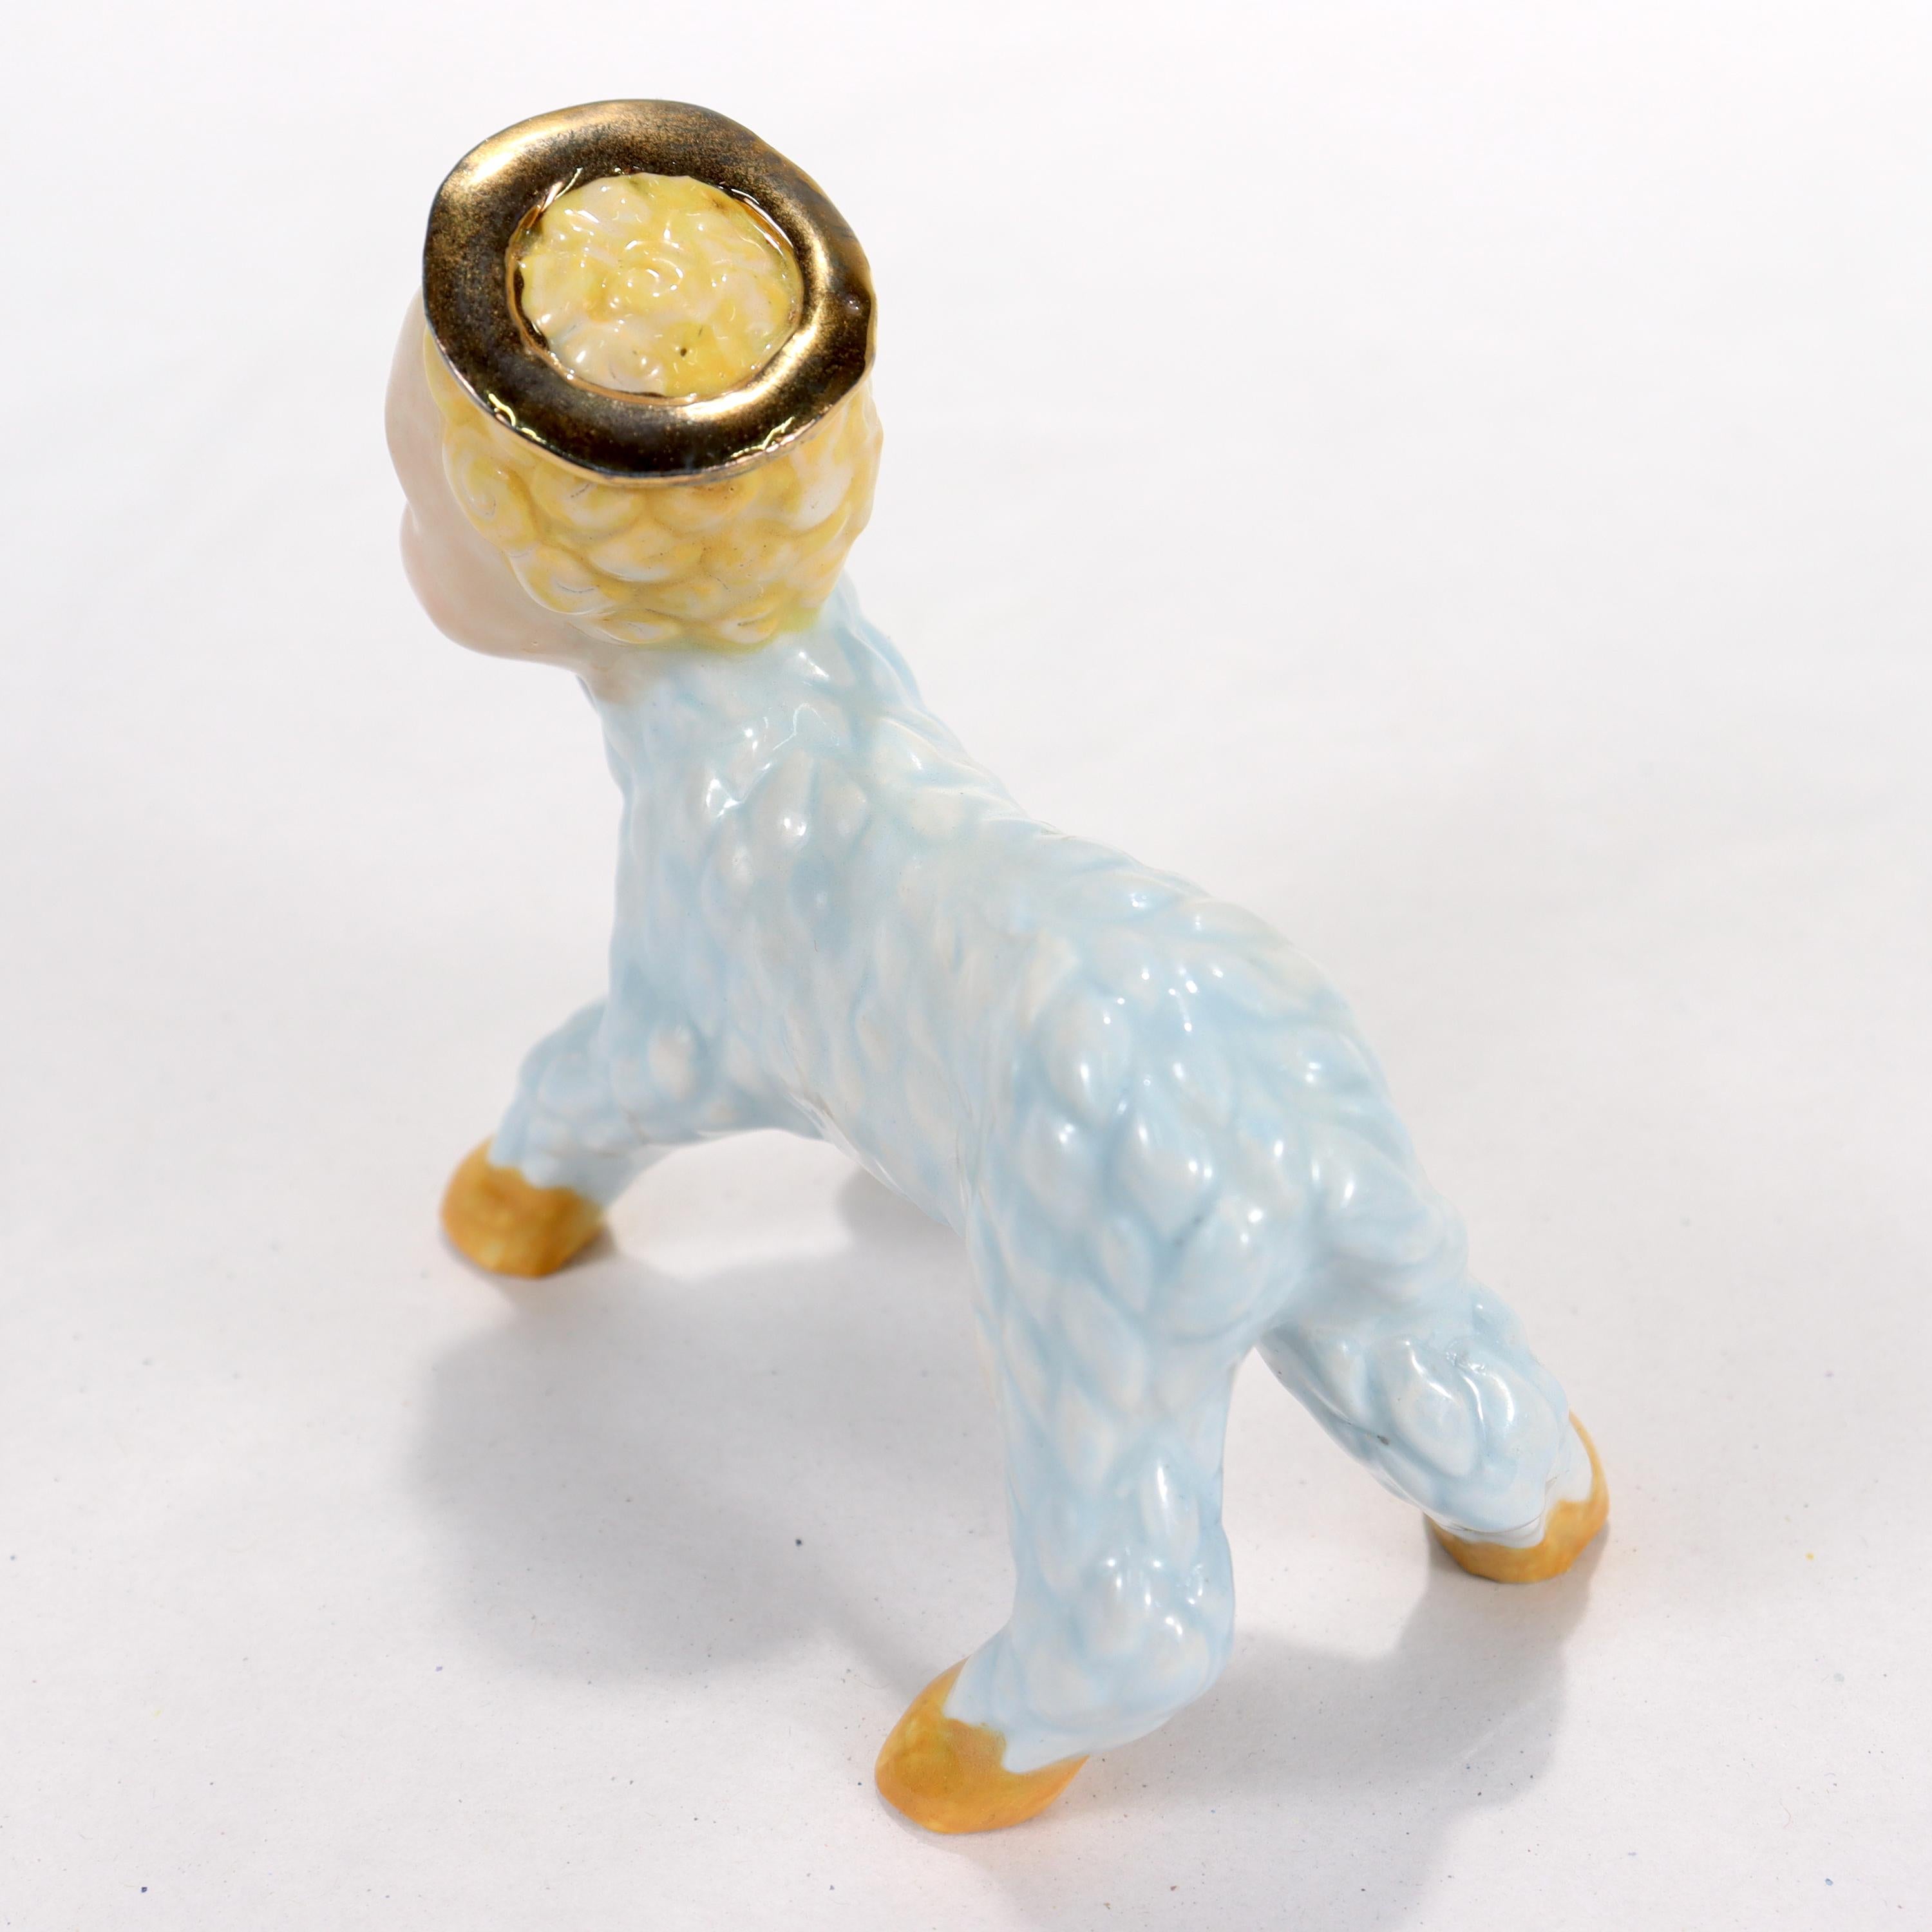 Painted Russel Biles 'Mary Had a Little Lamb' Porcelain Figurine